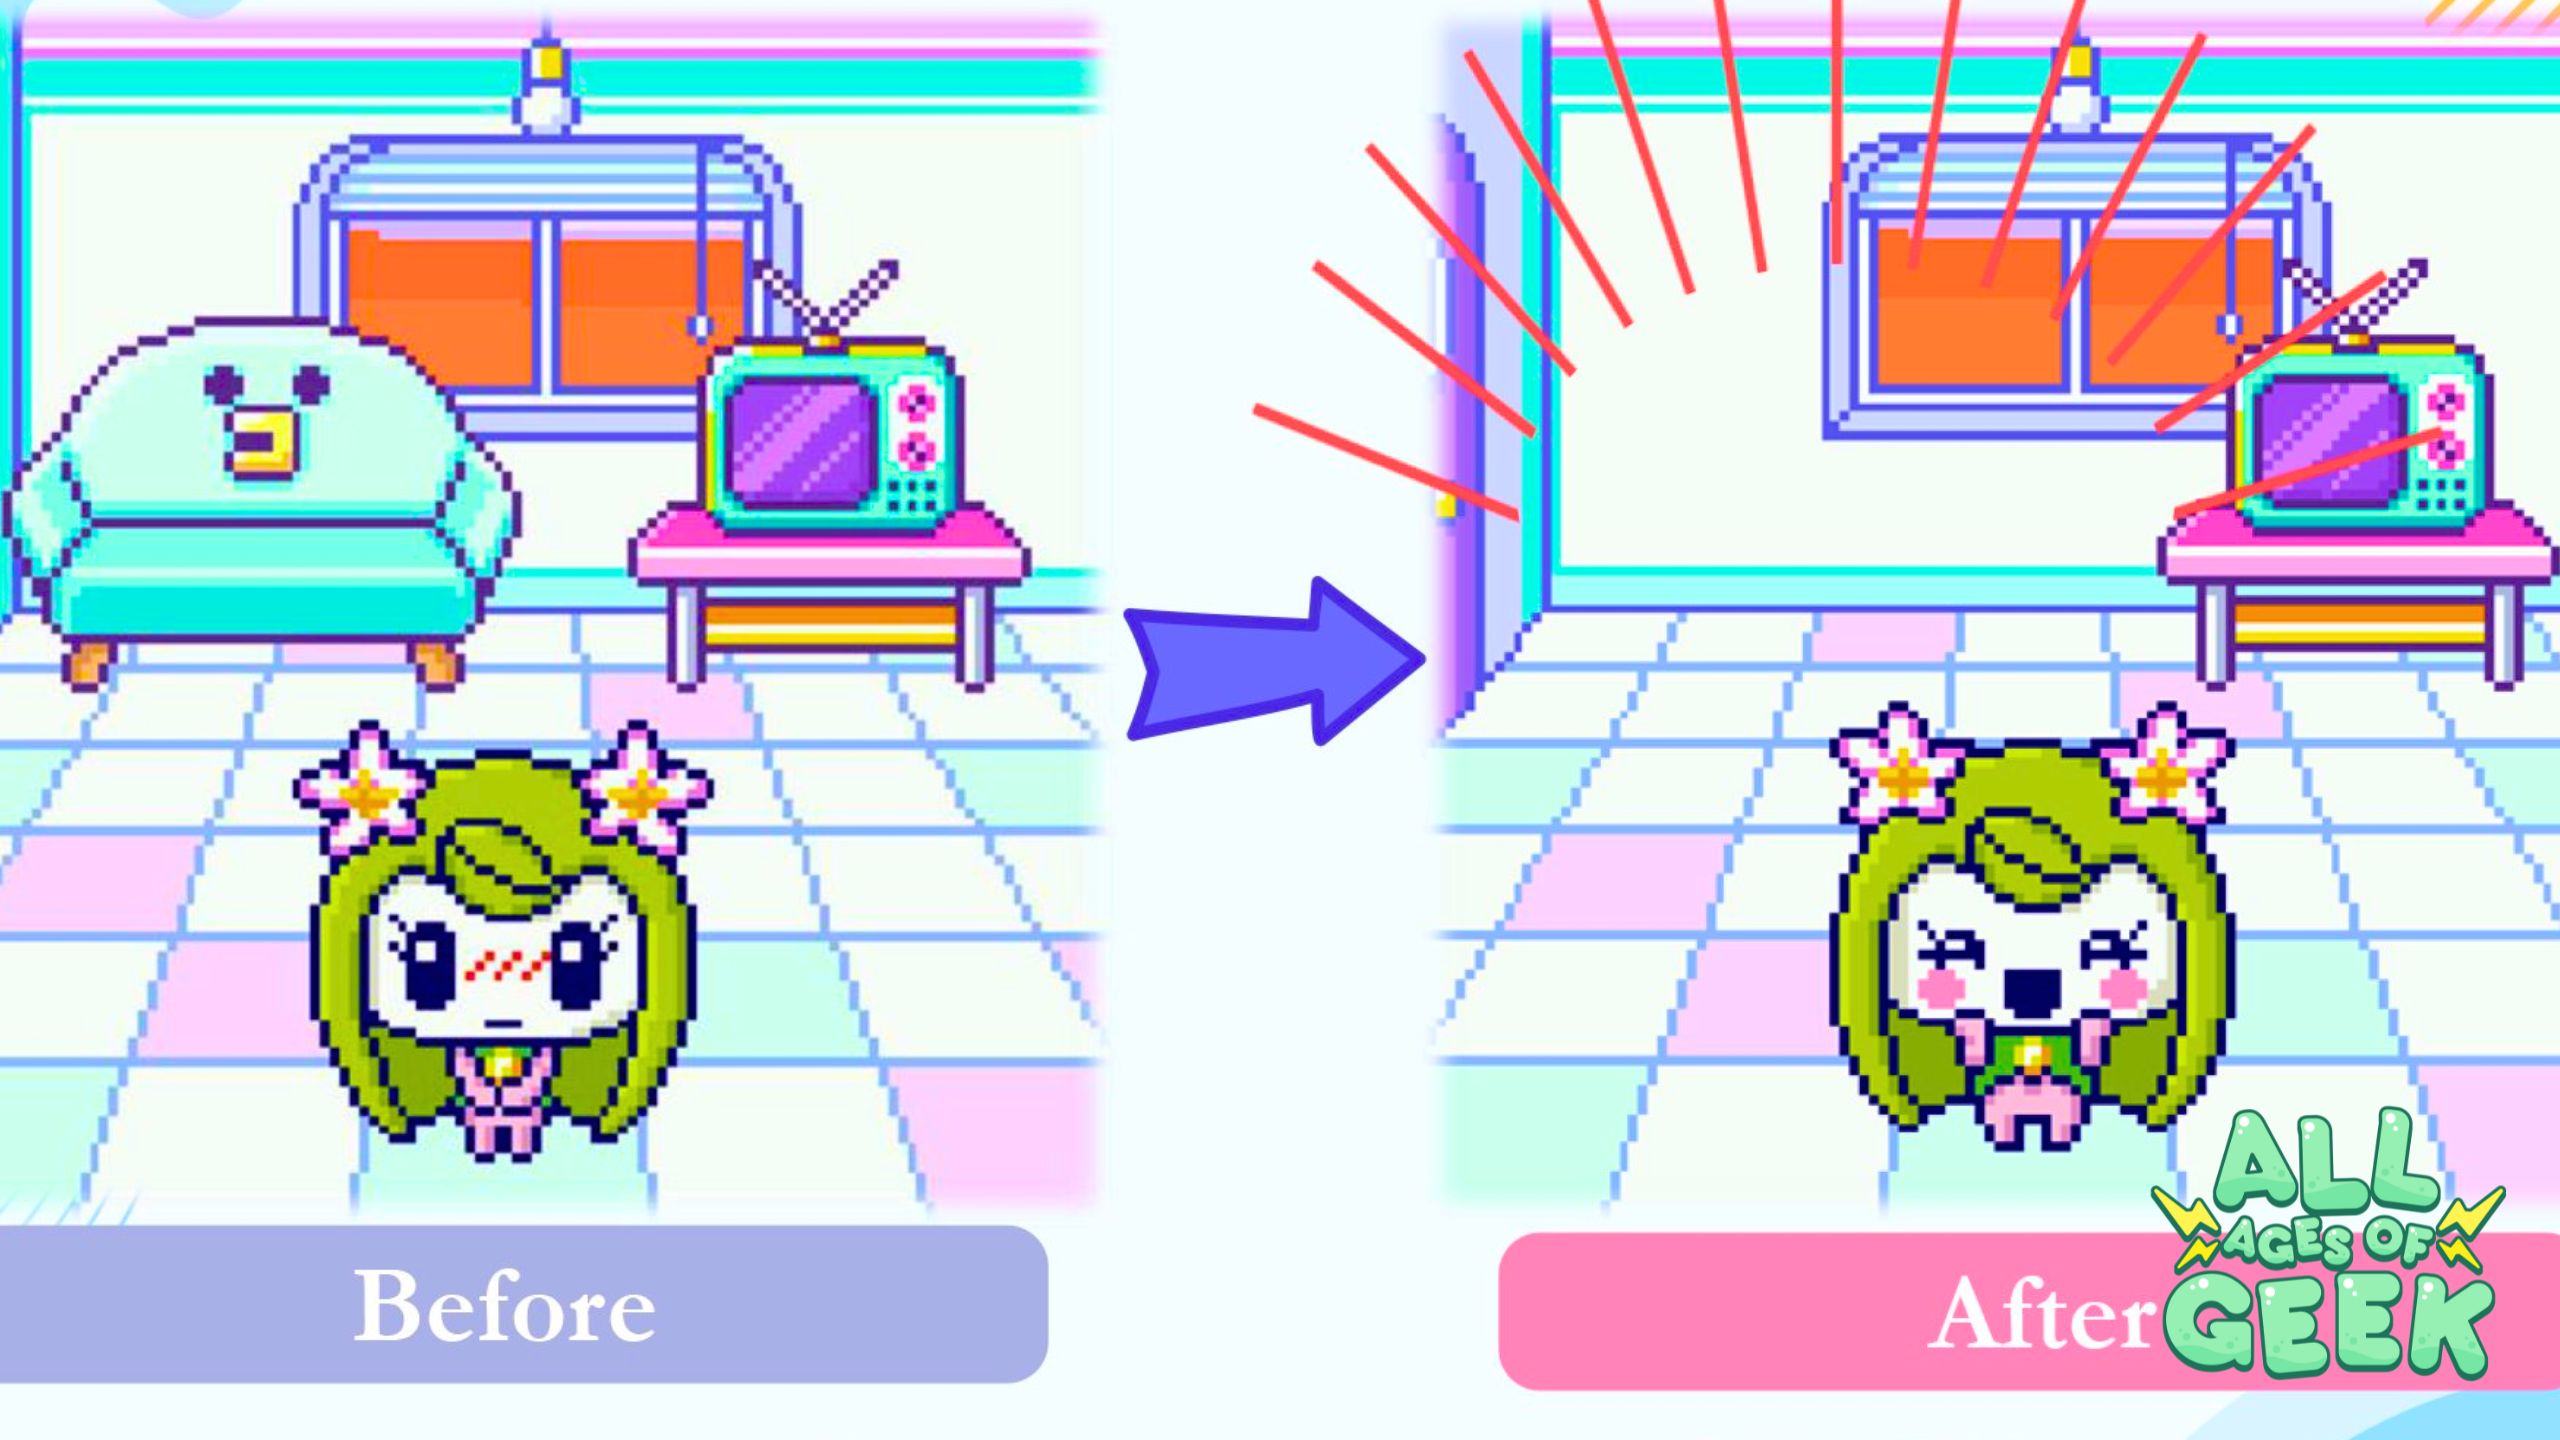 "Before" image of a Tamagotchi character in a living room with a sofa and TV, and "After" image showing the same character in a living room with a clear object allowing the background to be seen through. All Ages of Geek logo is present in the bottom right corner.